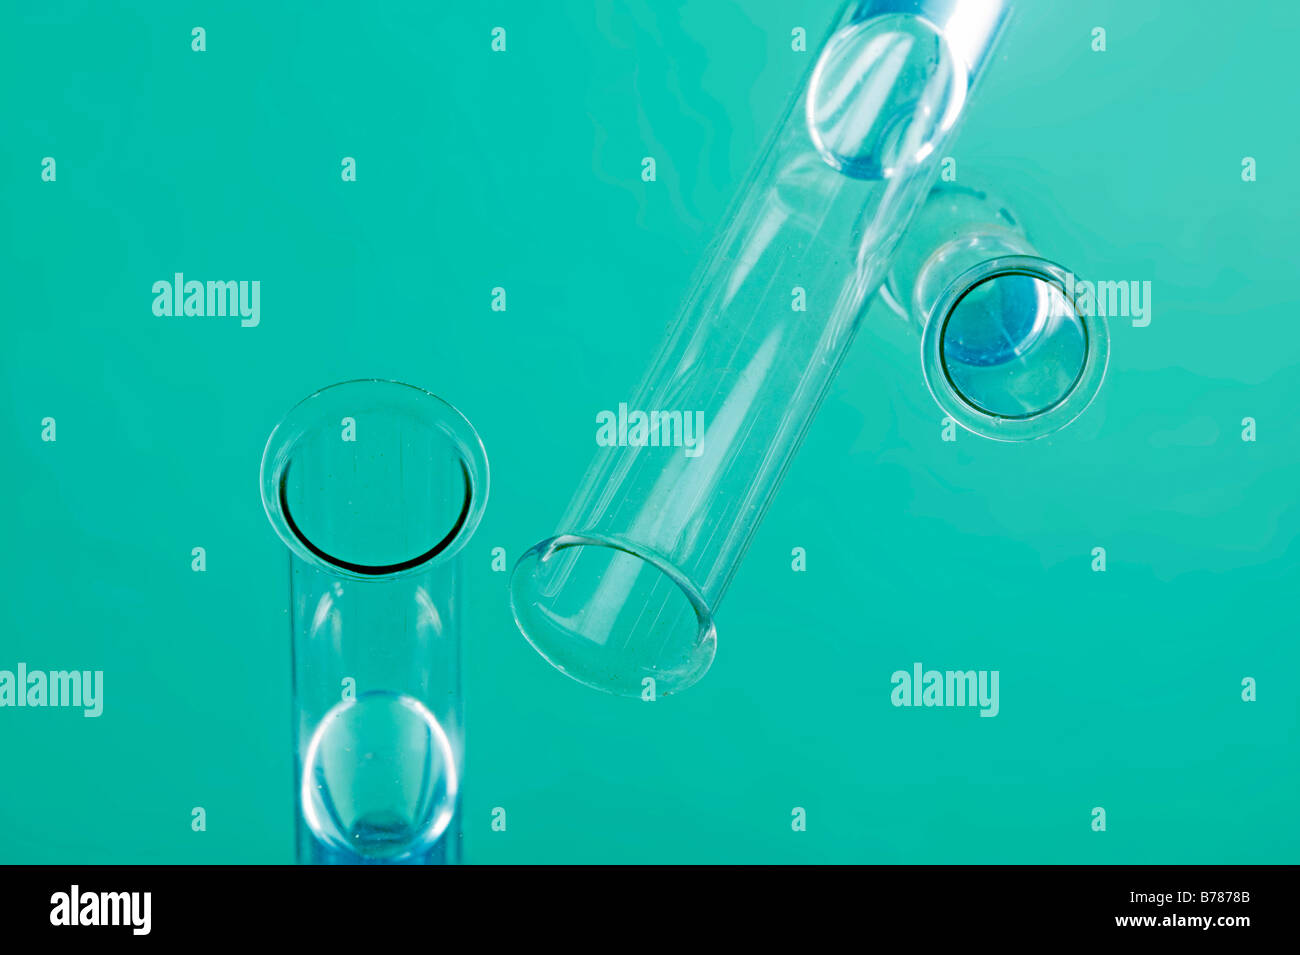 test tubes float in water abstract pattern Stock Photo